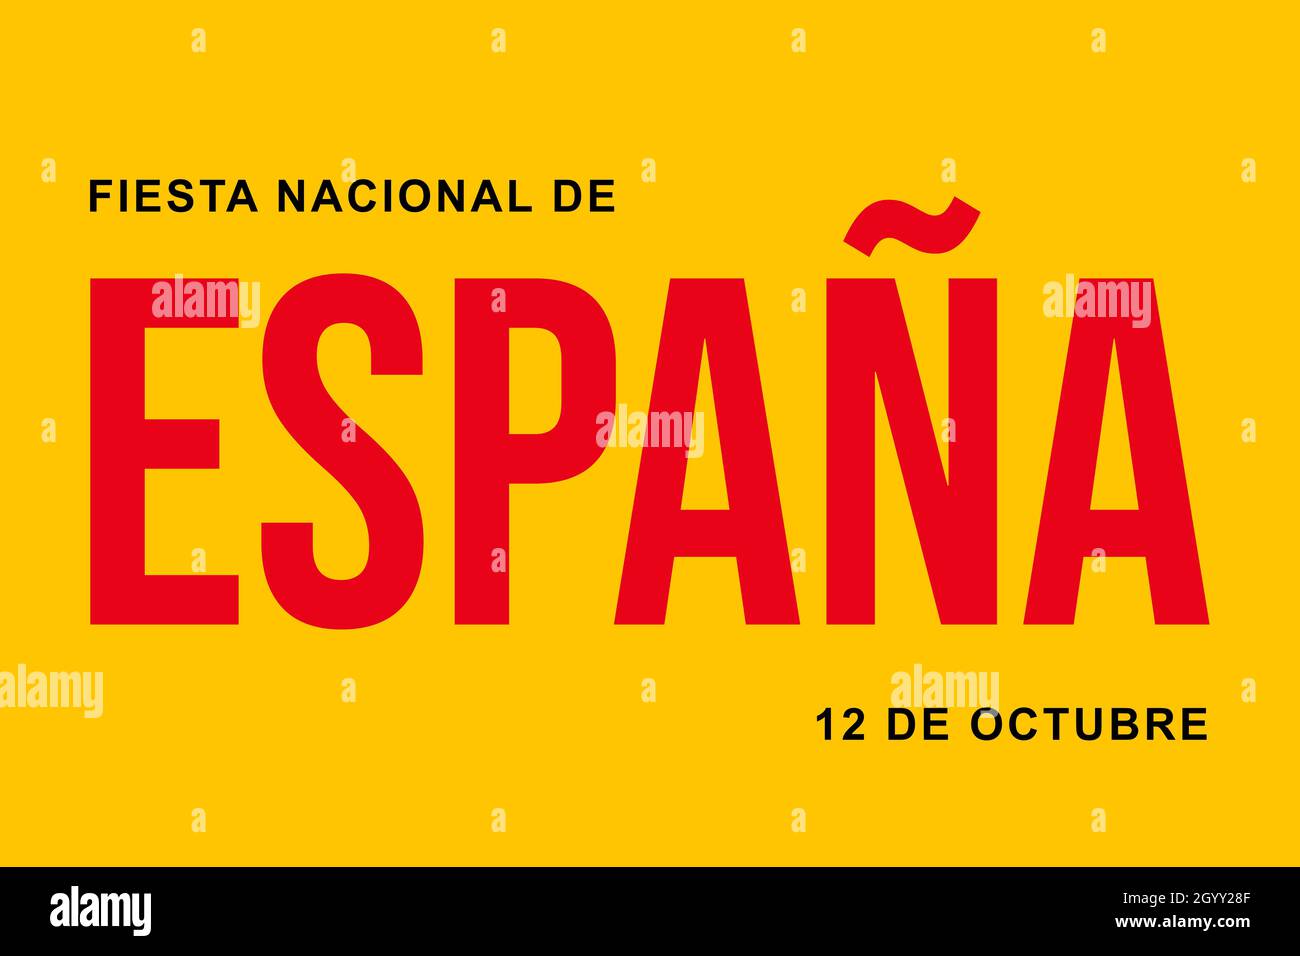 Spain National Day. Fiesta Nacional de Espana dia 12 de Octubre (Translated: The National Day of Spain on October 12). Poster, background Stock Photo